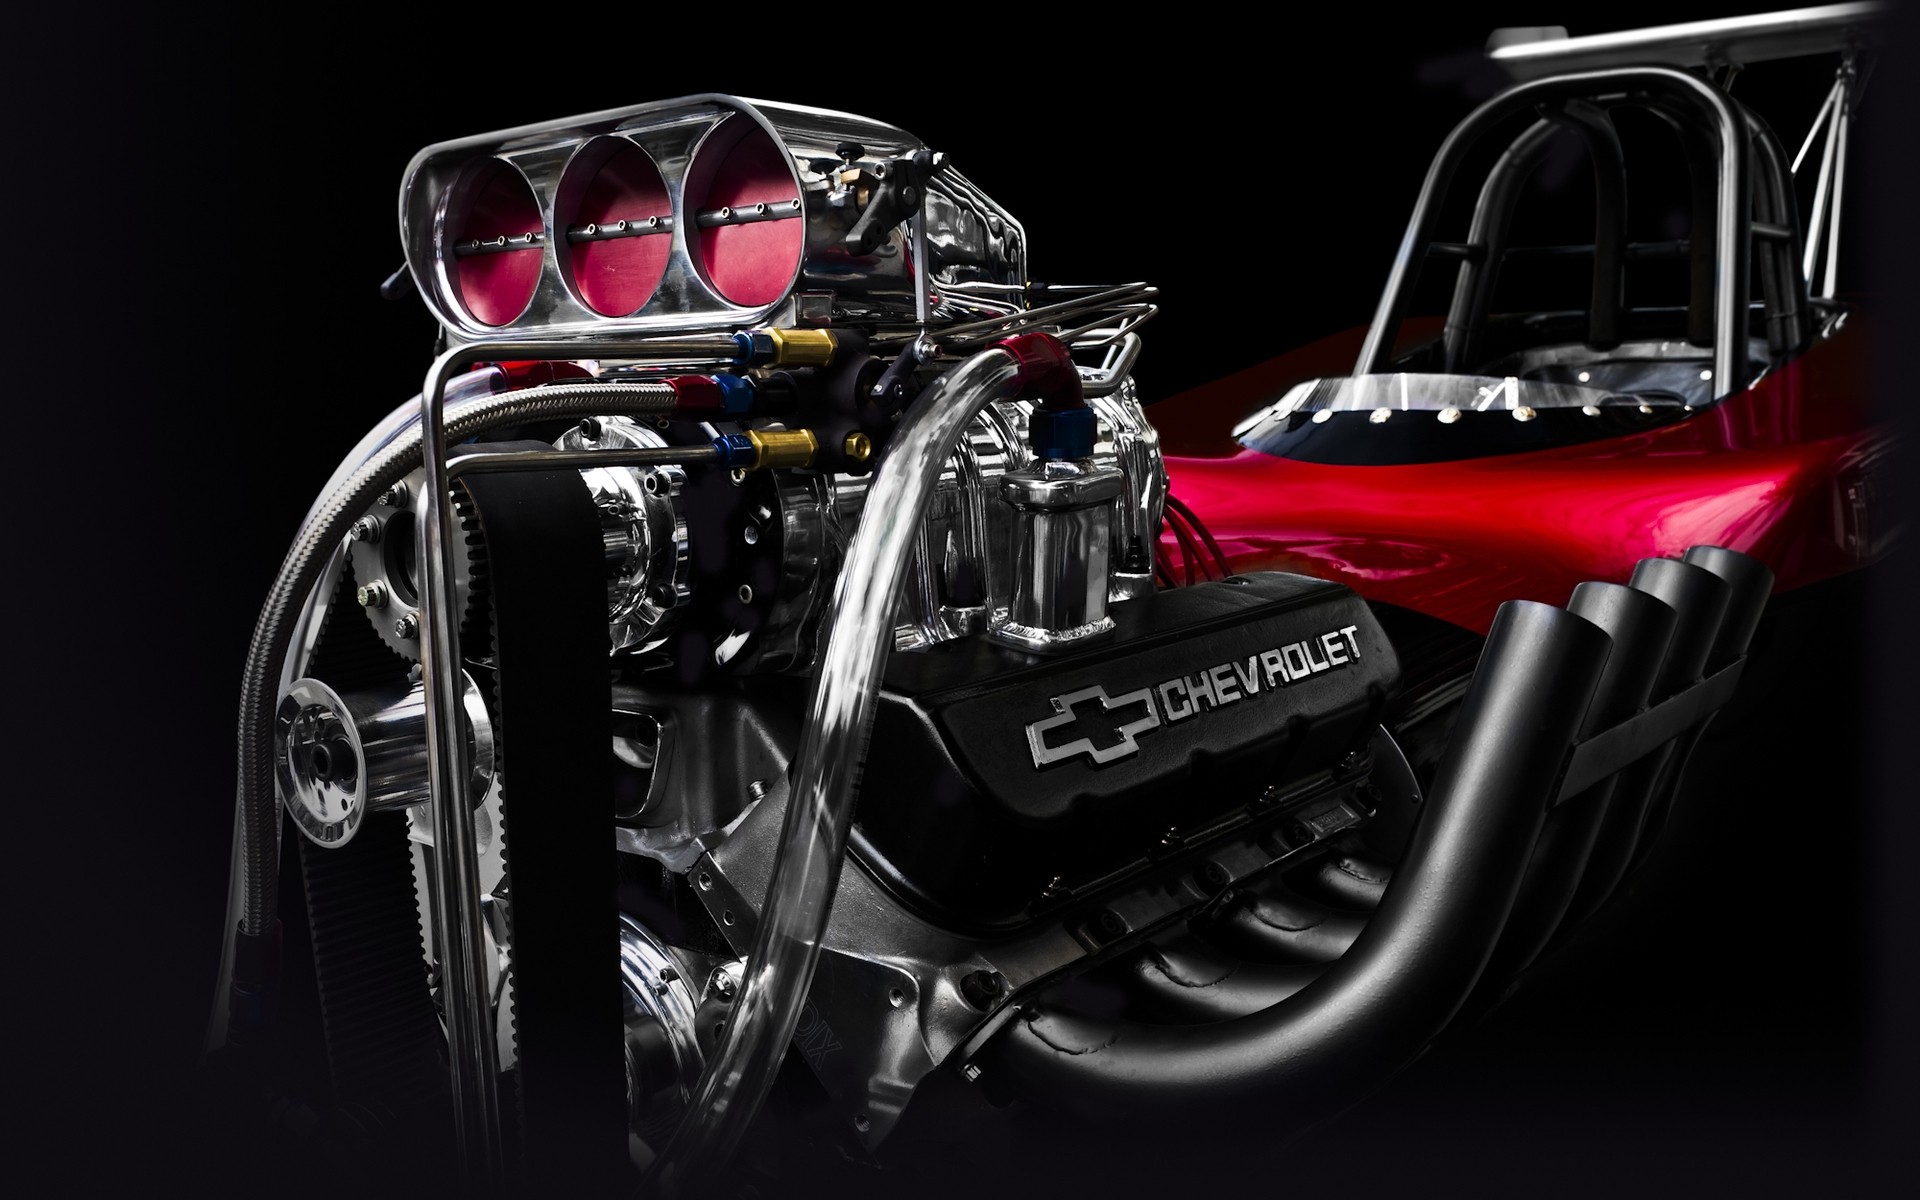 engines, Motors, Technology, Engine Exhaust, Chevrolet, Pipes, Screw, Gears, Sports Car Wallpaper